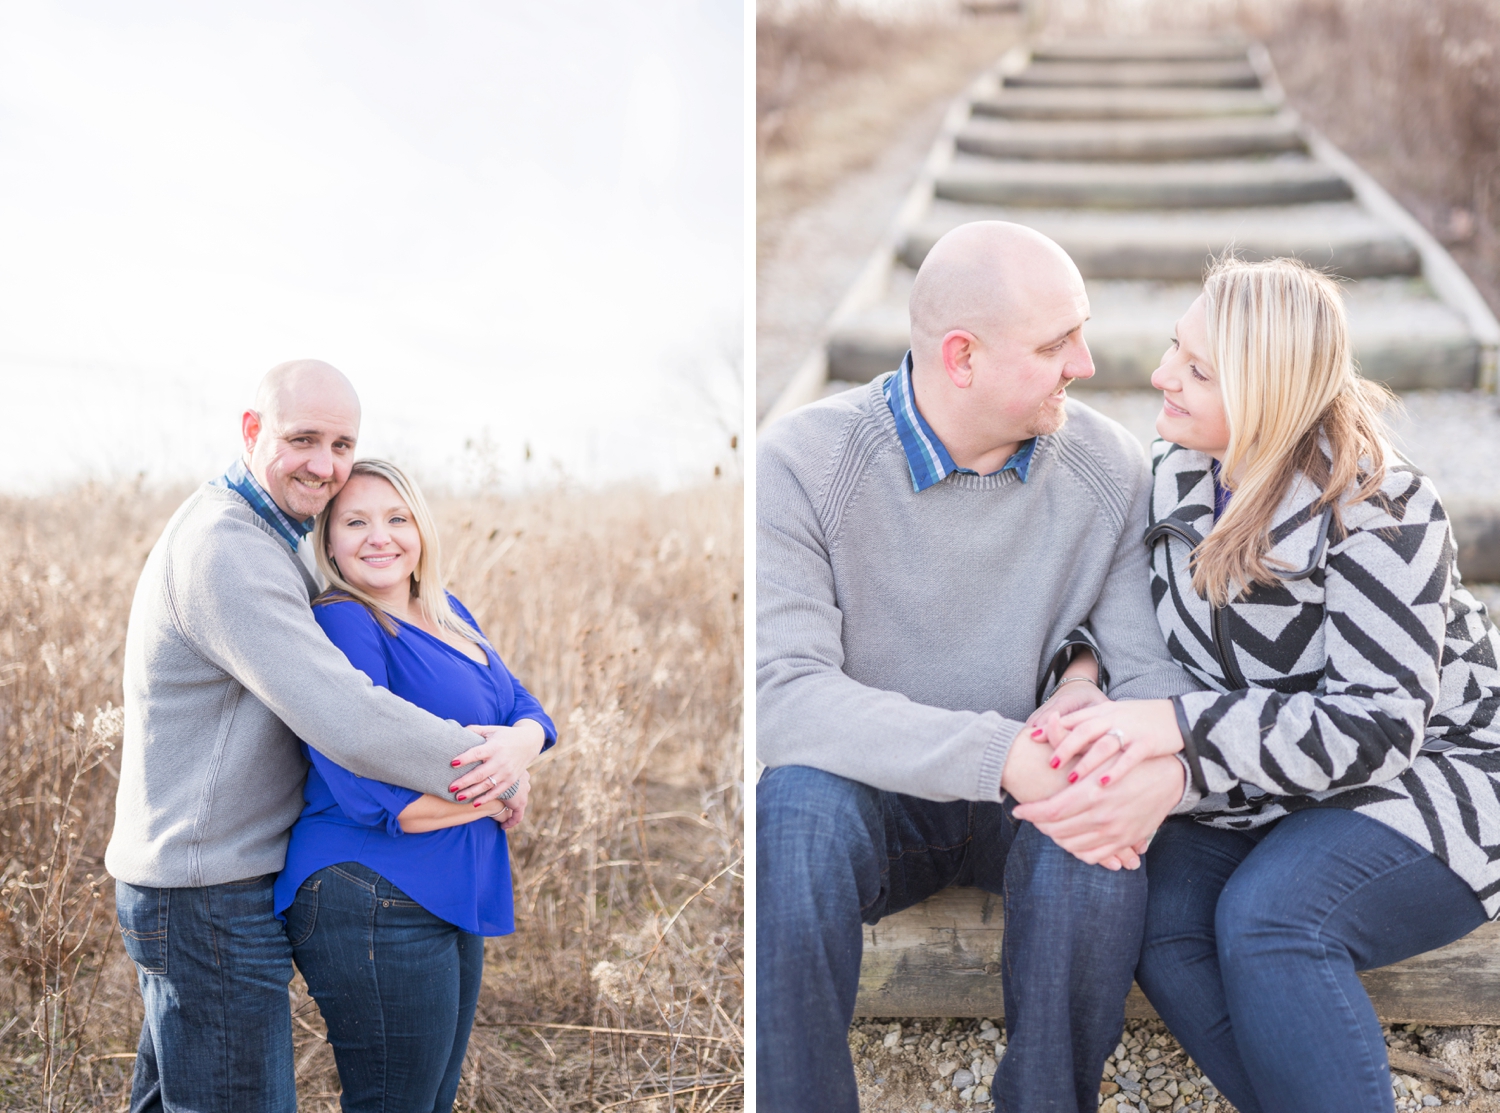 winter-engaged-couple-at-their-photo-session-at-the-scioto-audubon-park-near-grange-audubon-center-with-walkways-and-grass_0331